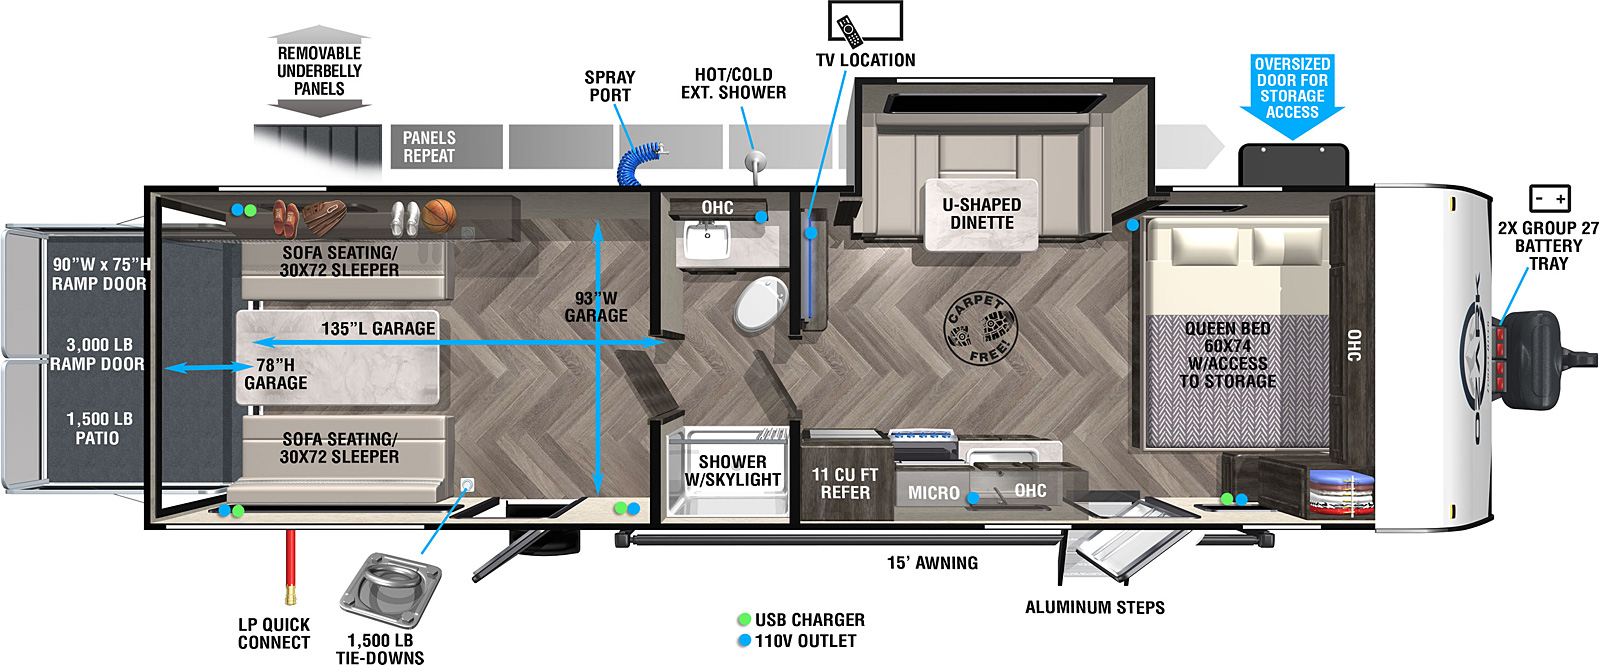 The Ozark 2700TH is a toy hauler model with two side entry doors, LP quick connect, storage compartment, spray port, exterior shower, one slide on the off-door side, and 15' awning on the outside. Inside, the front of the unit is taken up by a 60" x 74" queen bed that is situated perpendicular to the length of the unit. There is a wardrobe cabinet at the foot of the bed and additional cabinets mounted overhead across the front wall. Standing next to the bed and looking toward the rear of the RV, you have a slide room with U-shaped dinette on the right wall. Across from the dinette, on the left wall, is the kitchen area with sink, cooktop and oven, and 11 cubic foot refrigerator, with cabinets and a microwave mounted overhead. Back on the right wall, a TV is located to the right of the dinette. Next to the TV is a bathroom with sink, medicine cabinet, and commode. A shower with skylight is located directly across from the bathroom. At the very rear, there is a removable table with a 30" x 72" sofa sleeper on either side. When these are moved out of the way, the remaining space functions as a 78" long and 93" wide garage. 